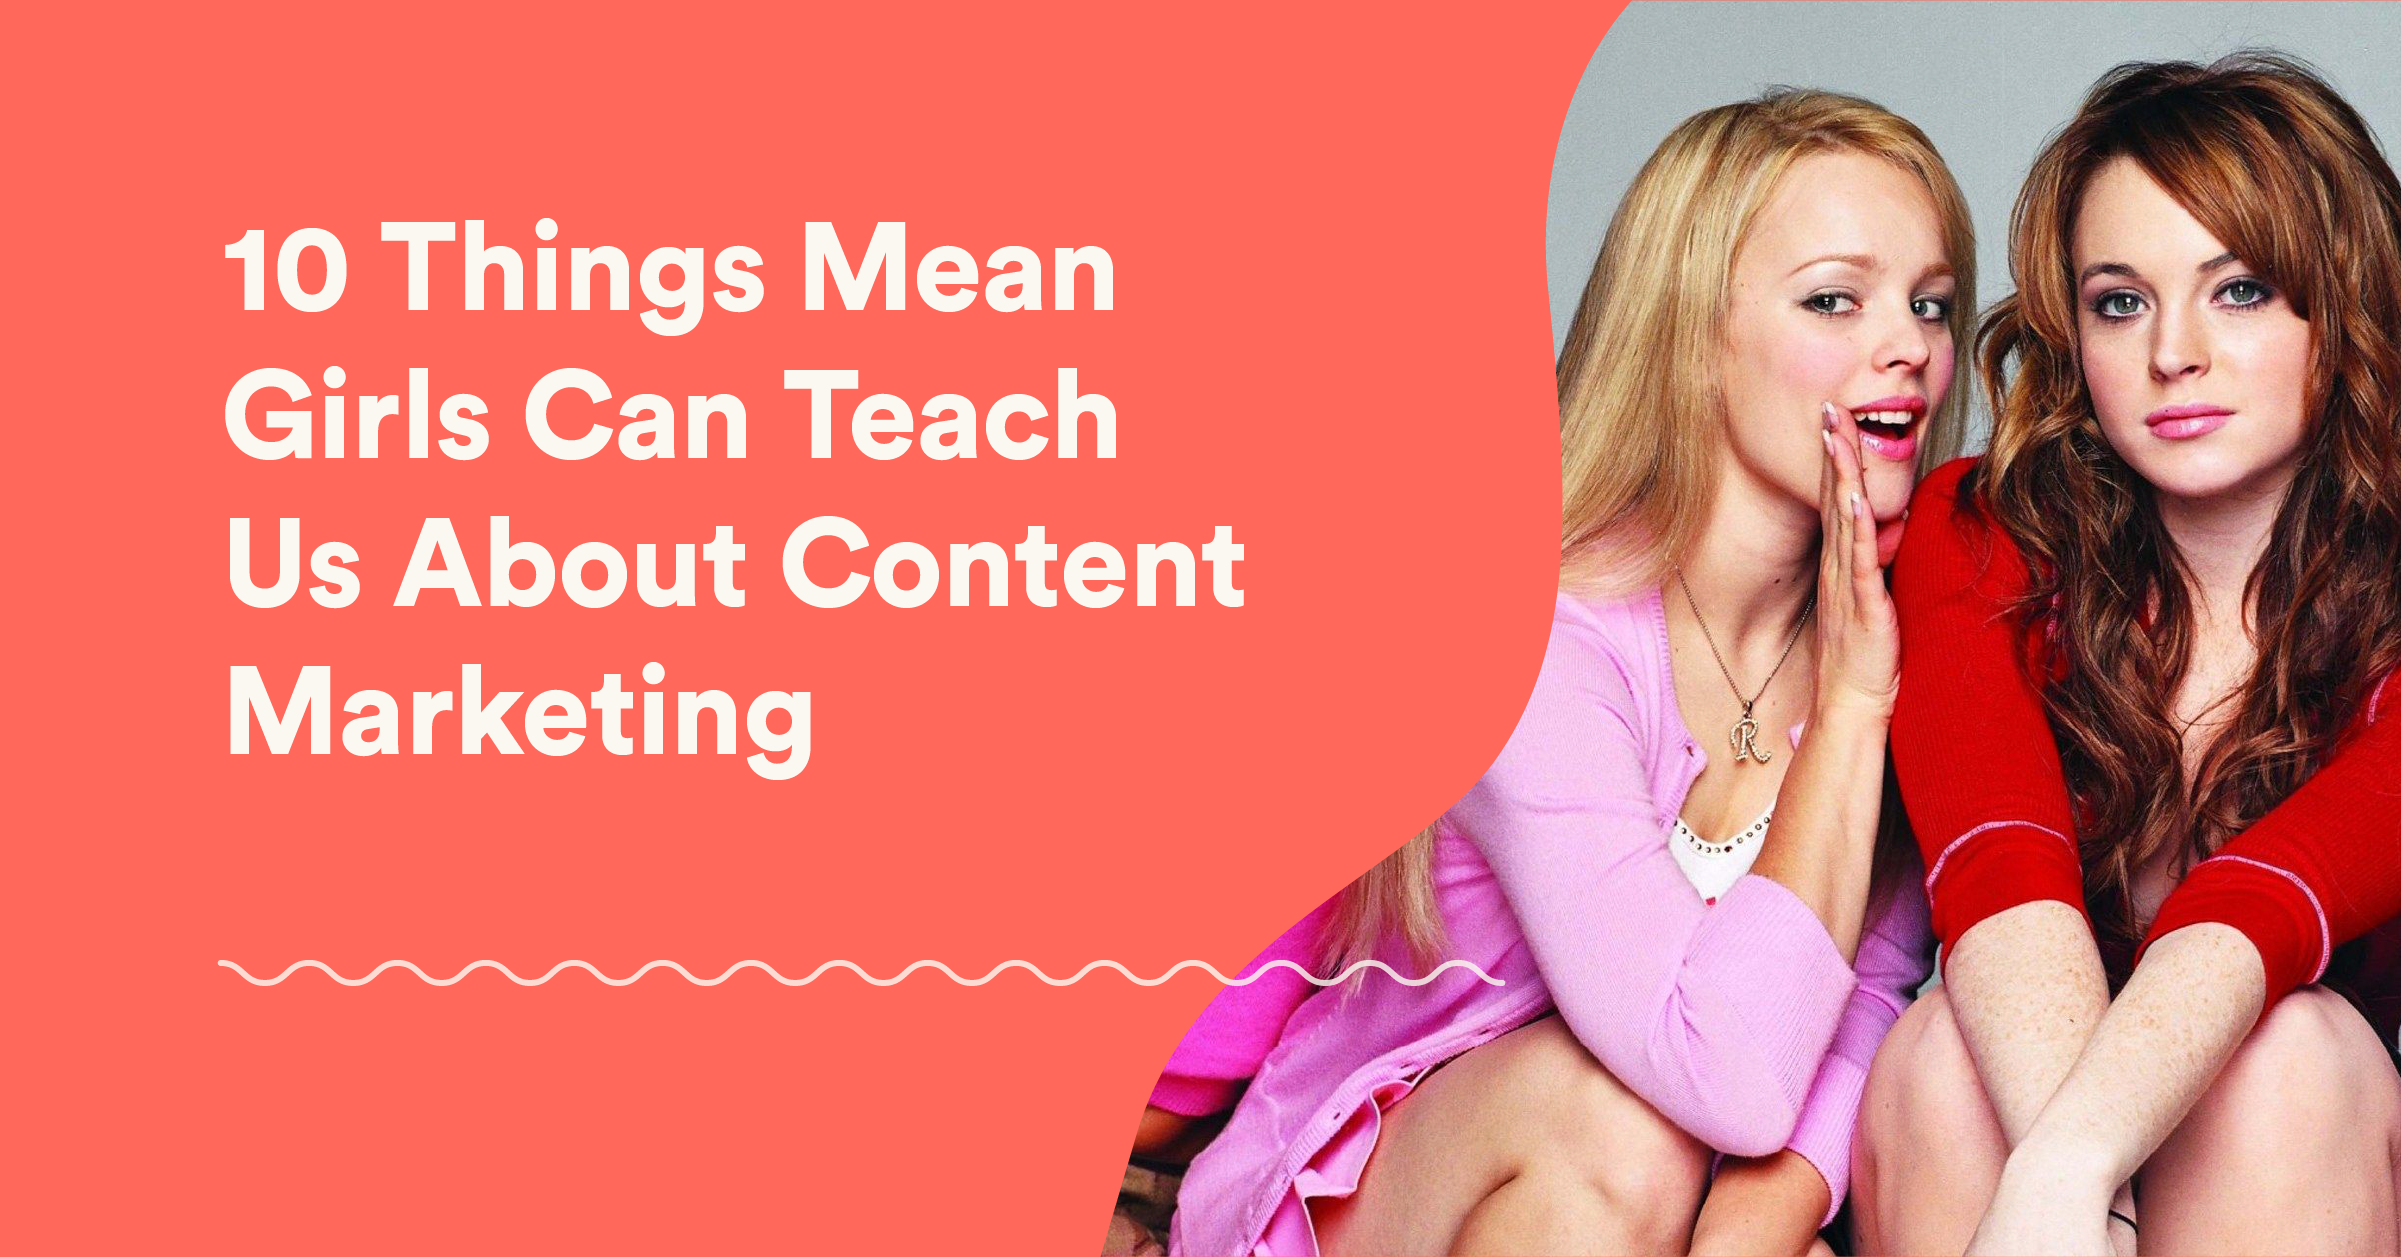 10 Content Marketing Lessons from Mean Girls